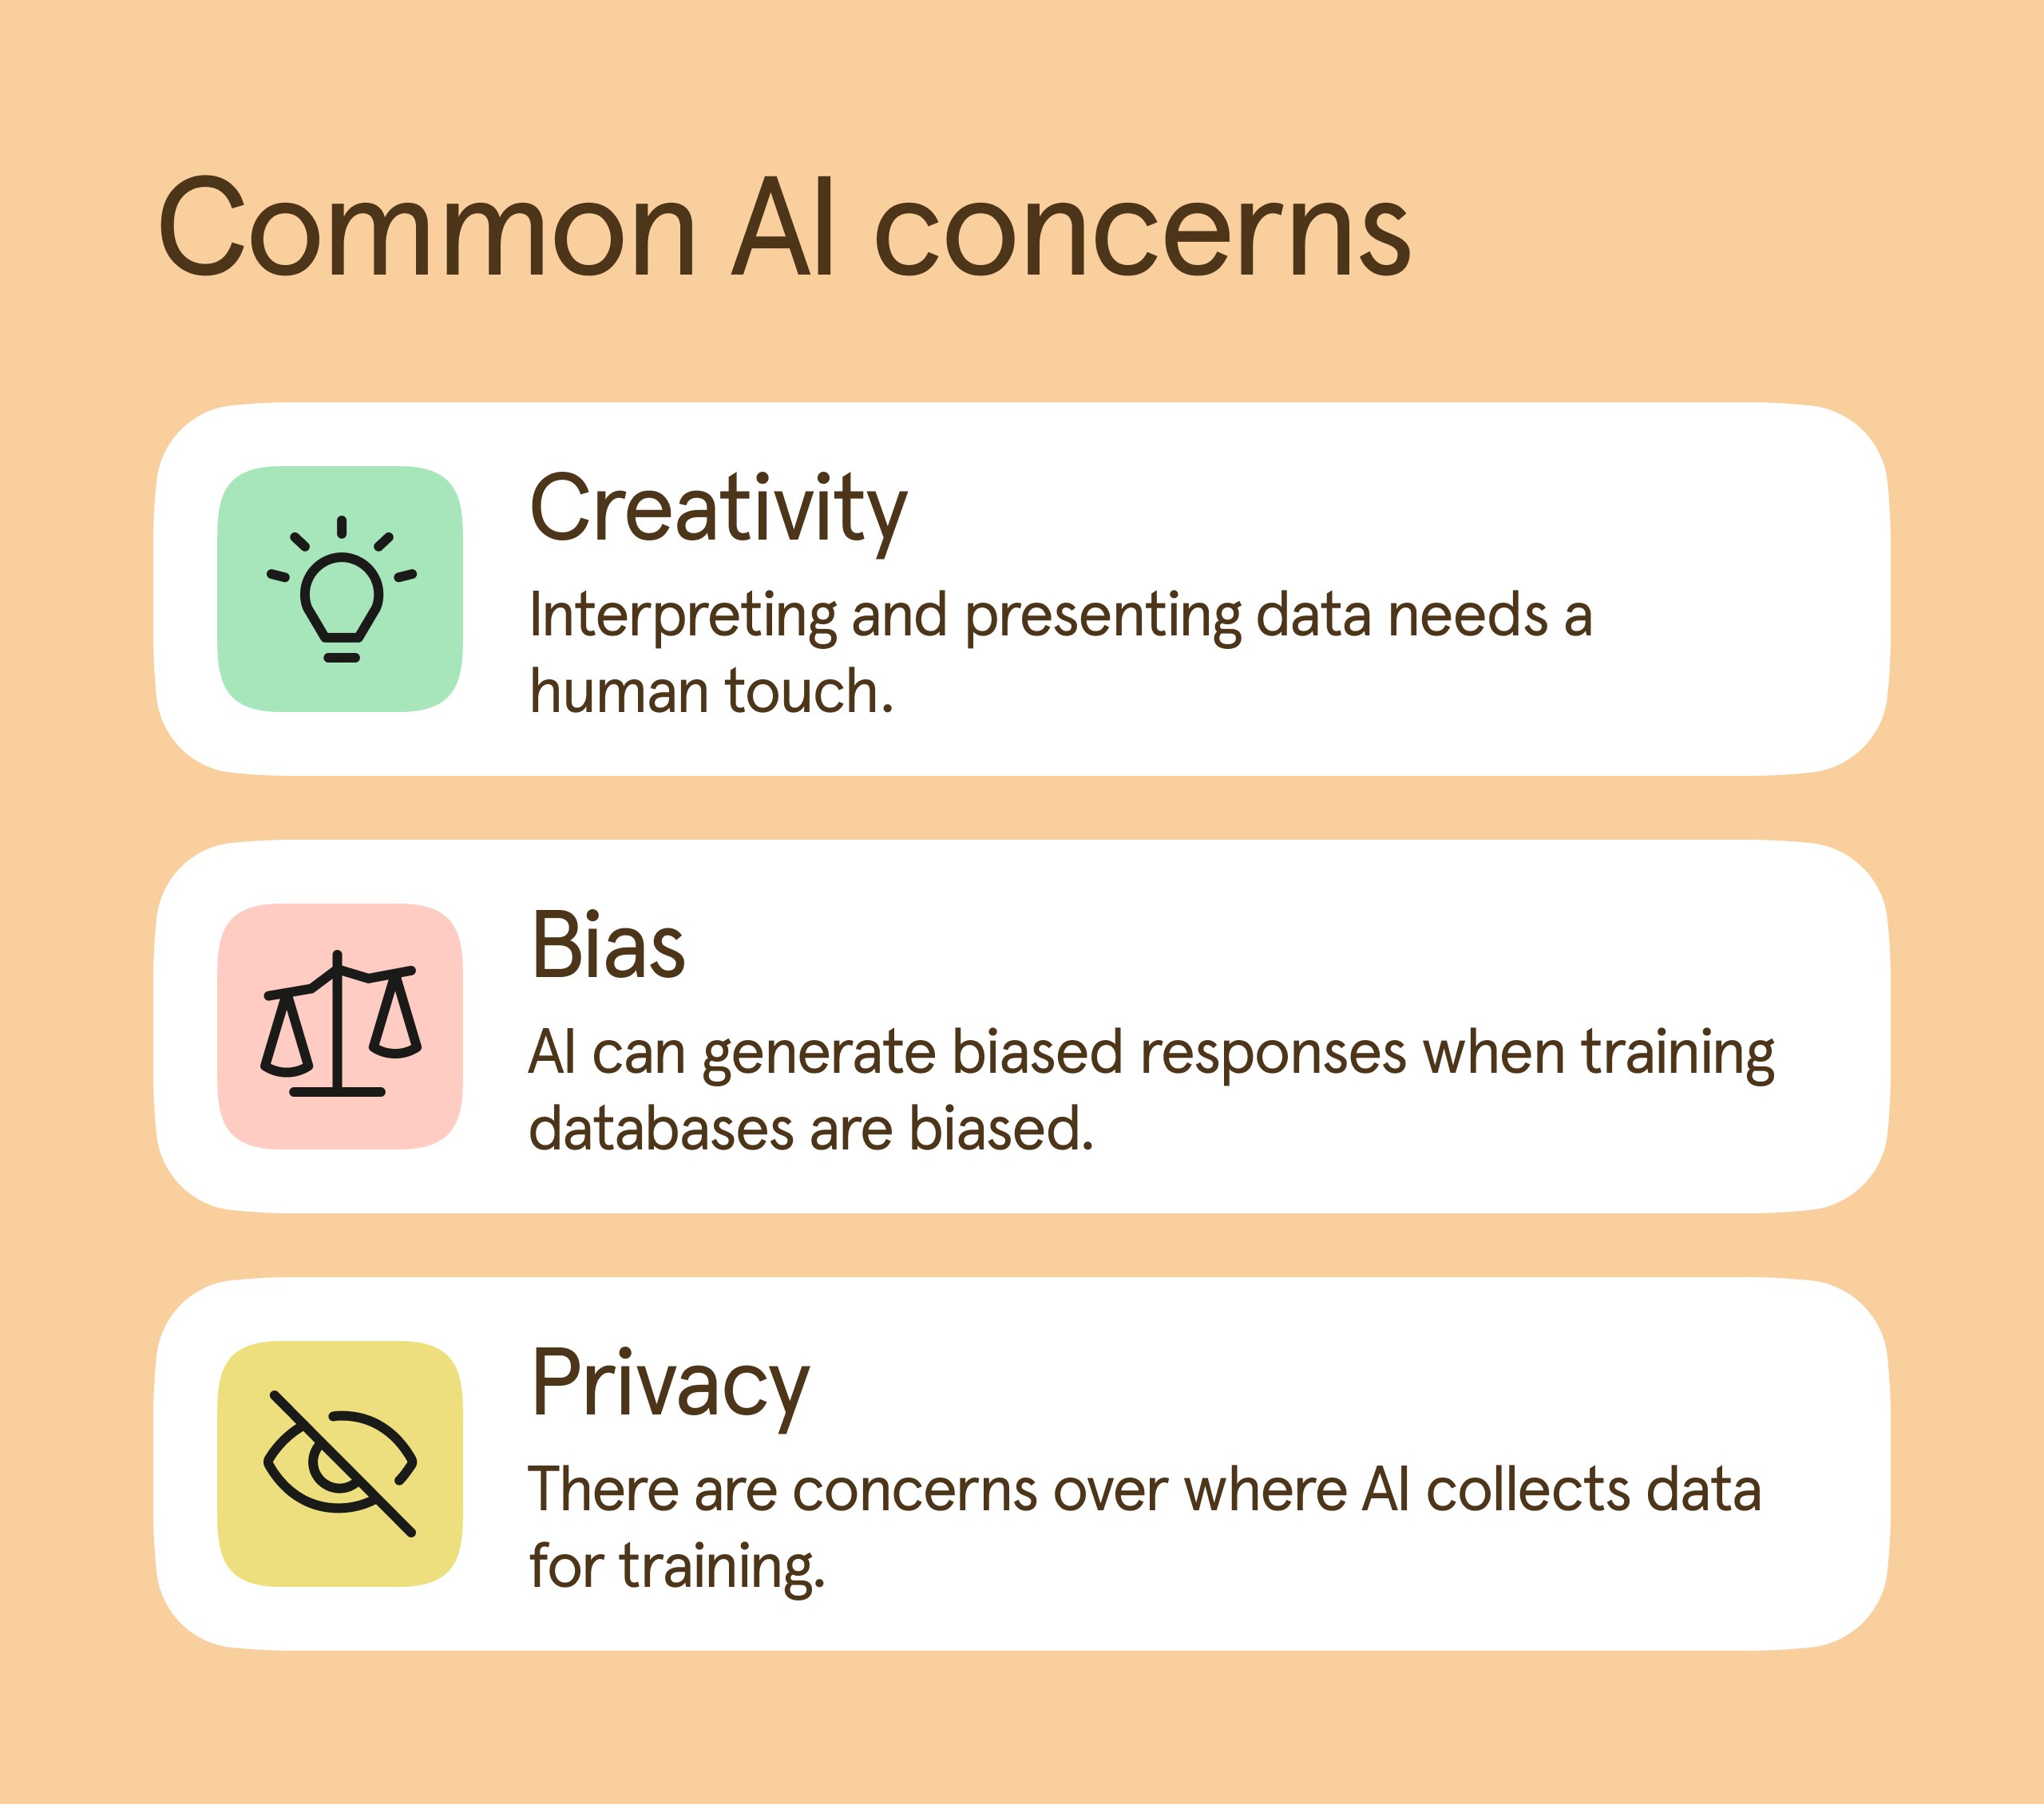 Common AI concerns are related to creativity, bias, and privacy.